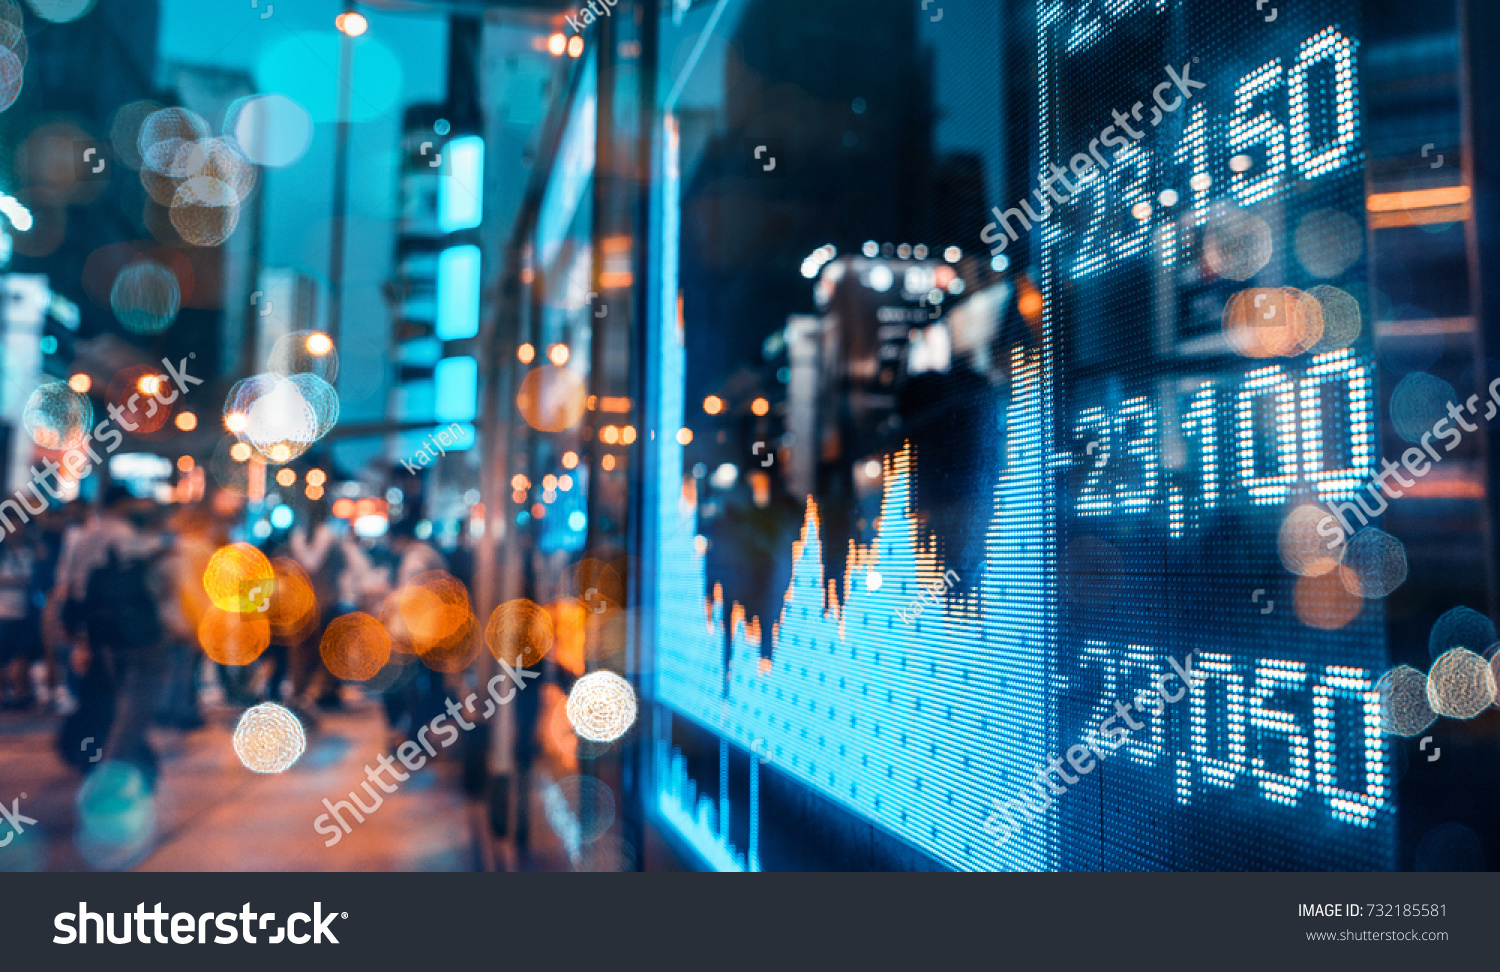 Display of Stock market quotes with city scene reflect on glass #732185581